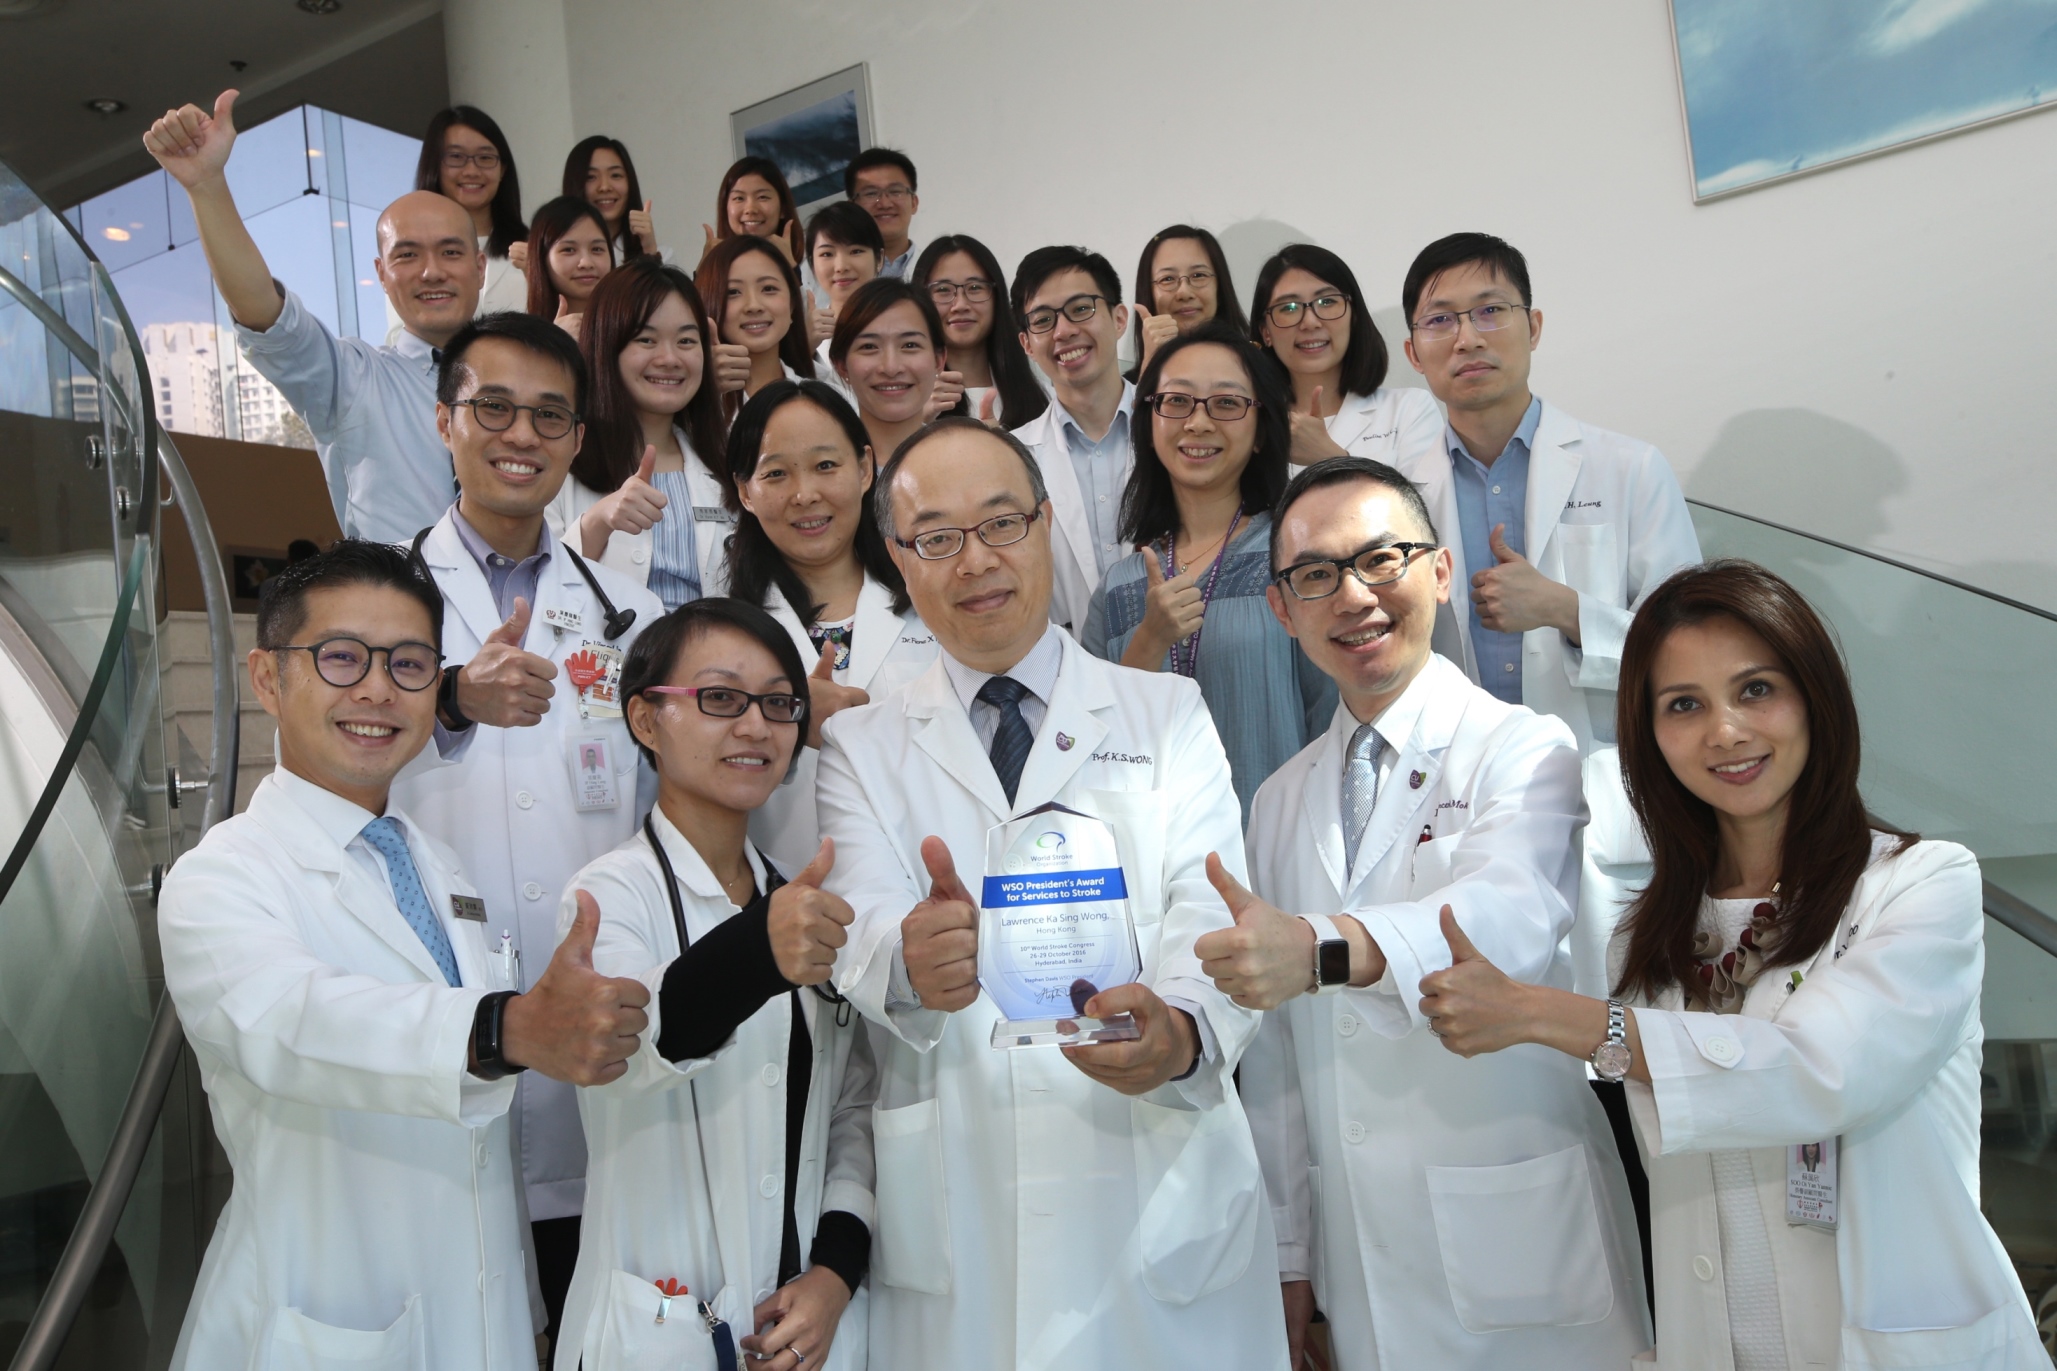 Prof. Lawrence Ka Sing WONG (front row centre), Mok Hing Yiu Professor of Medicine and Head of Division of Neurology, Department of Medicine and Therapeutics, CUHK receives the ‘World Stroke Organization President’s Award for Services to Stroke’ this year for the contribution of him and his team in stroke research. 